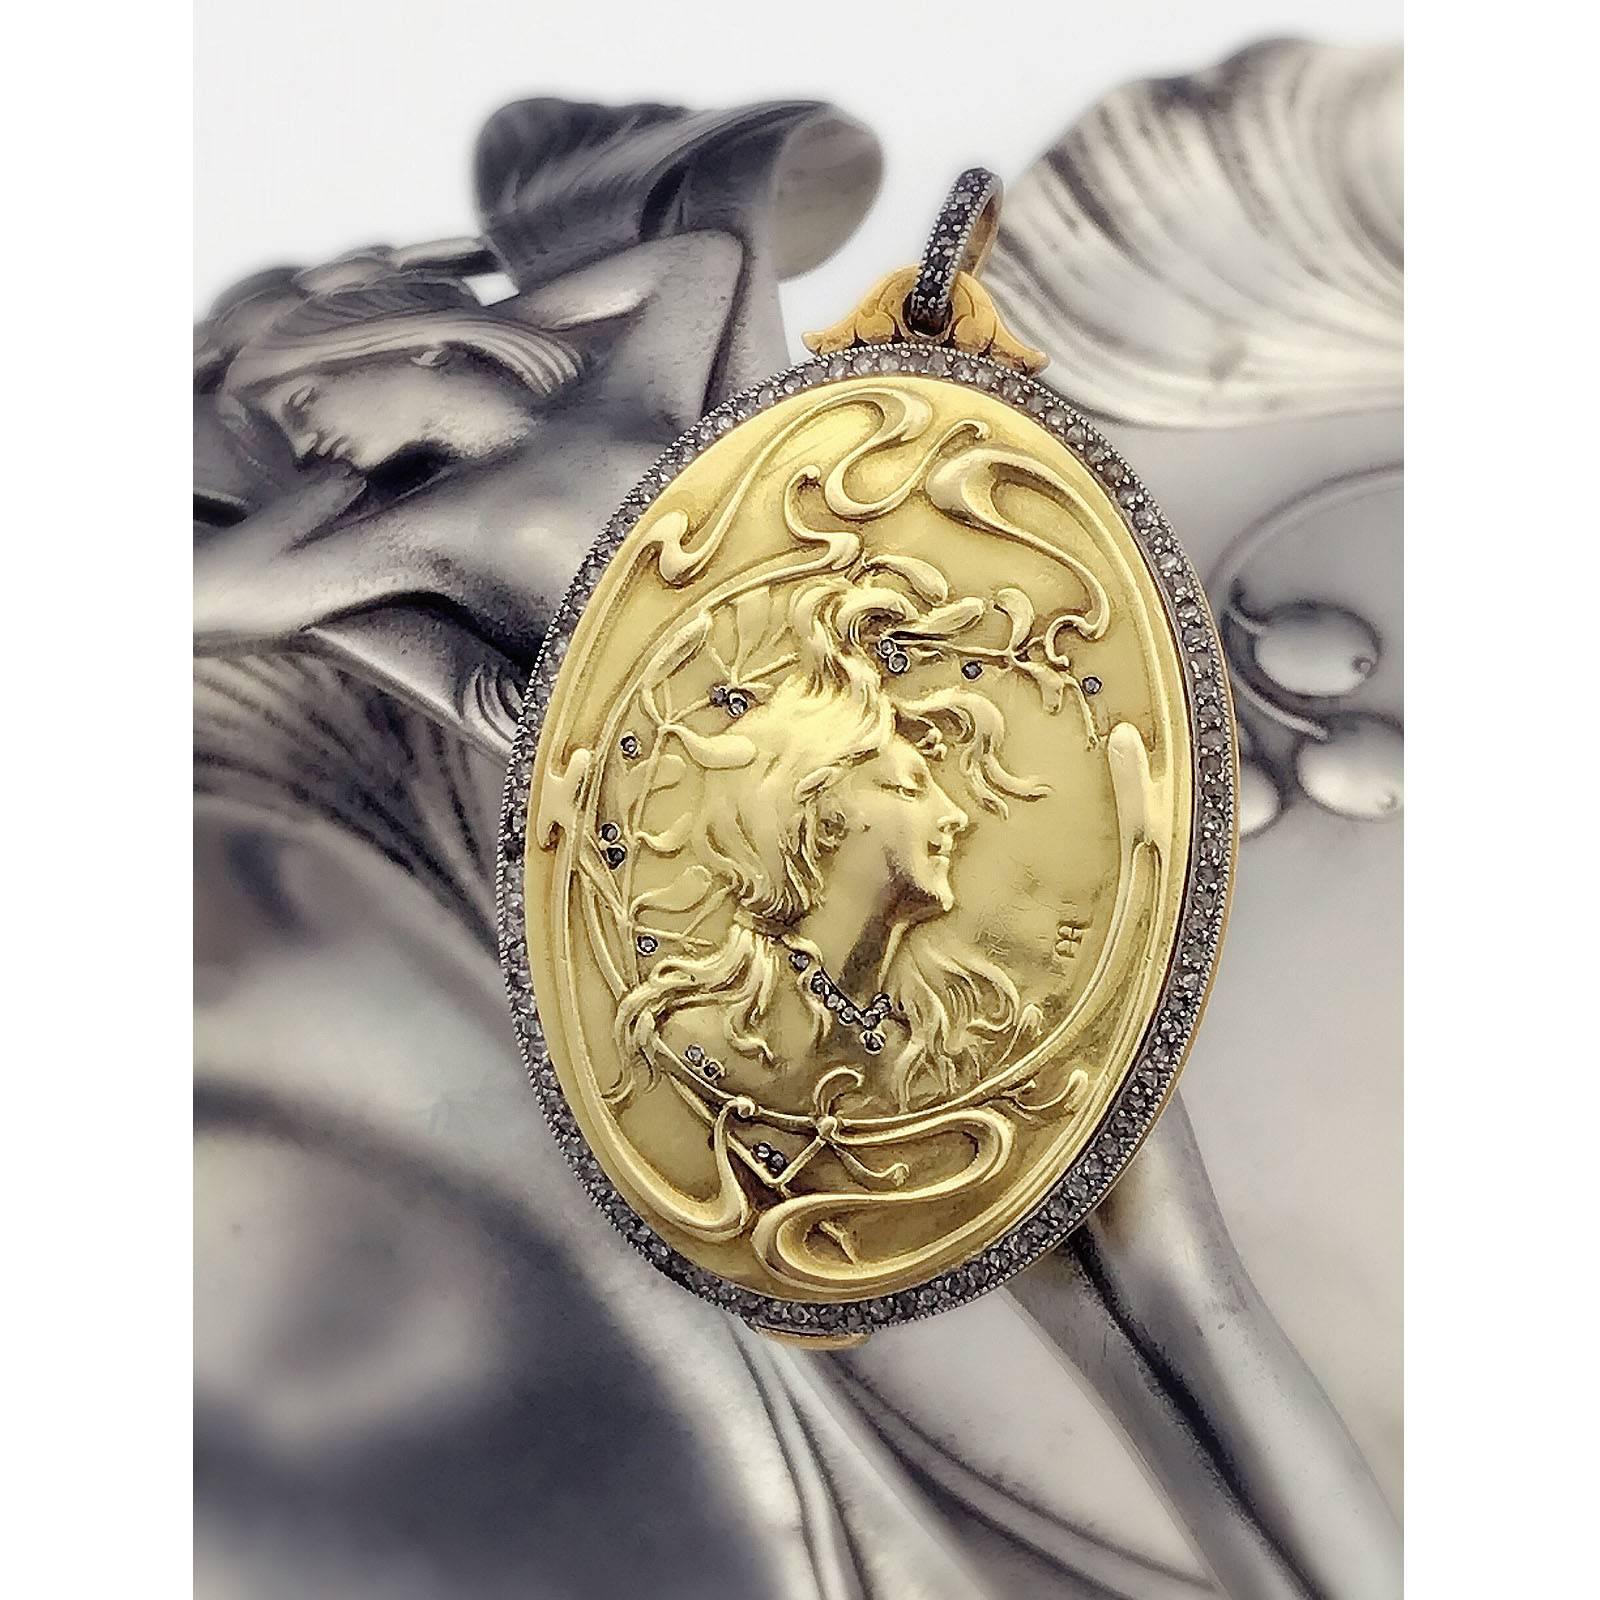 Art Nouveau 18k gold diamond locket. Of oval-shape outline, depicting the profile of a lady with flowing hair, within a diamond point surround, opening to reveal an interior mirror. Locket with Maker's mark for Comte Prosper d'Epinay De Briort,